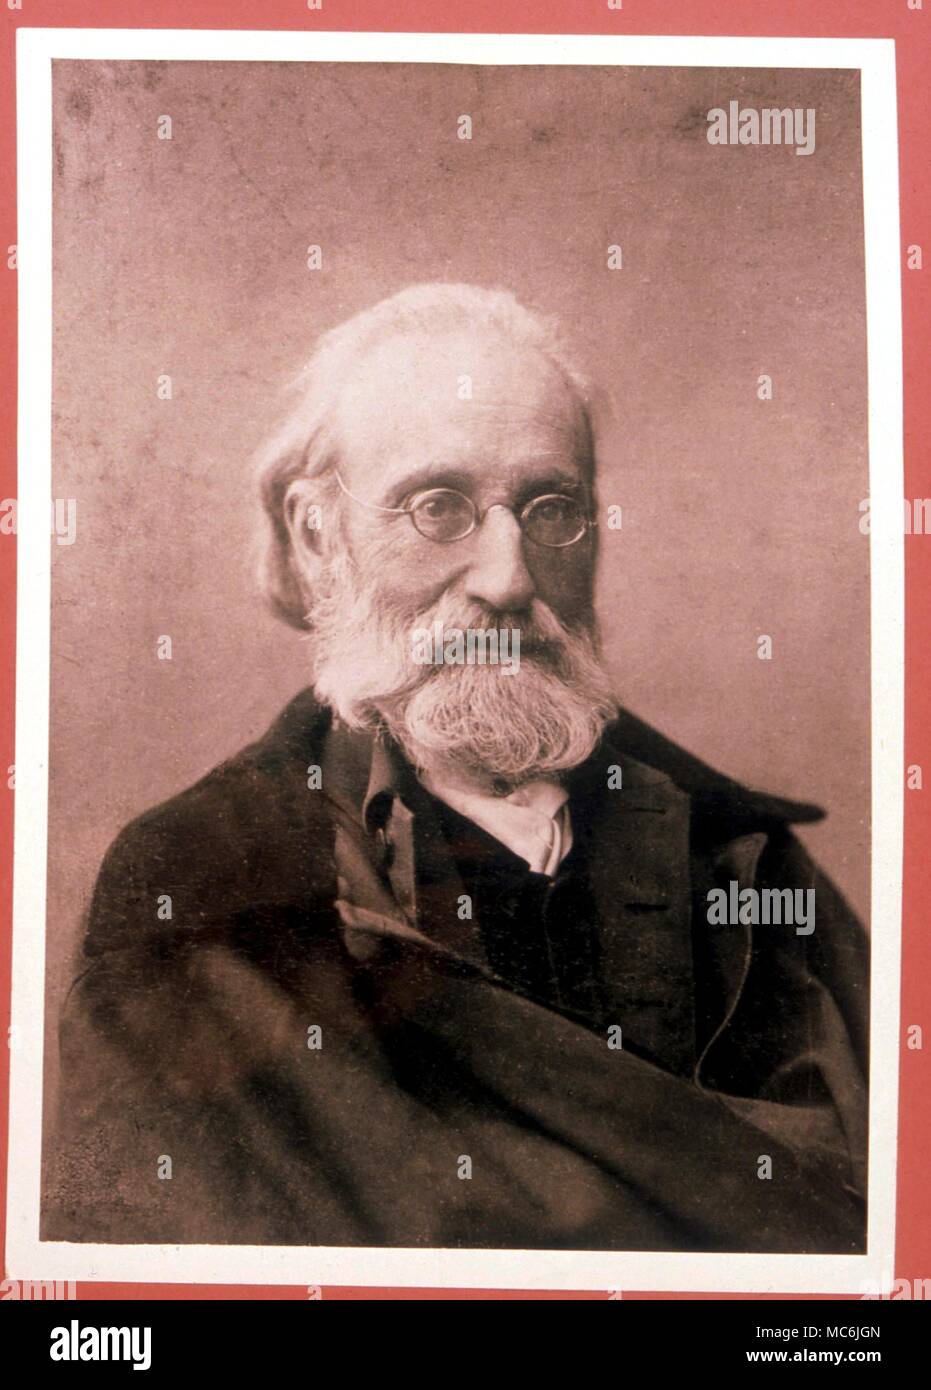 OCCULTISTS - ANDREW JACKSON DAVIS. Andrew Jackson Davis (1826-1910), clairvoyant and writer on esoteric themes - author of 'The Principles of Nature'; and so 'Penetralia'. Stock Photo